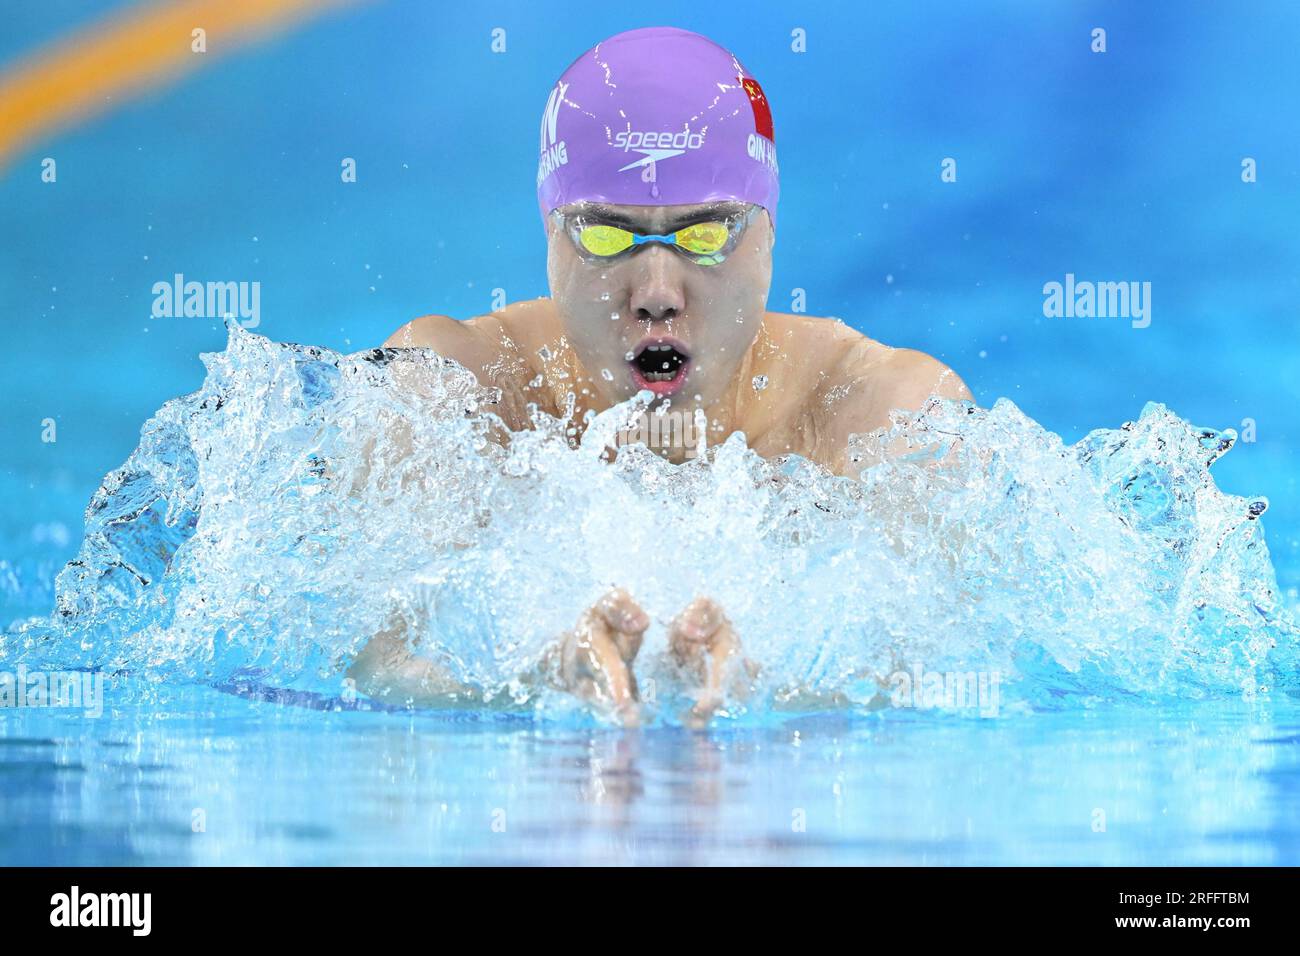 (230803) -- CHENGDU, Aug. 3, 2023 (Xinhua) - Qin Haiyang of China competes during the Men's 200m Breaststroke Semifinal of swimming at the 31st FISU Summer World University Games in Chengdu, southwest China's Sichuan Province, Aug. 3, 2023. (Xinhua/Chen Zeguo) Stock Photo